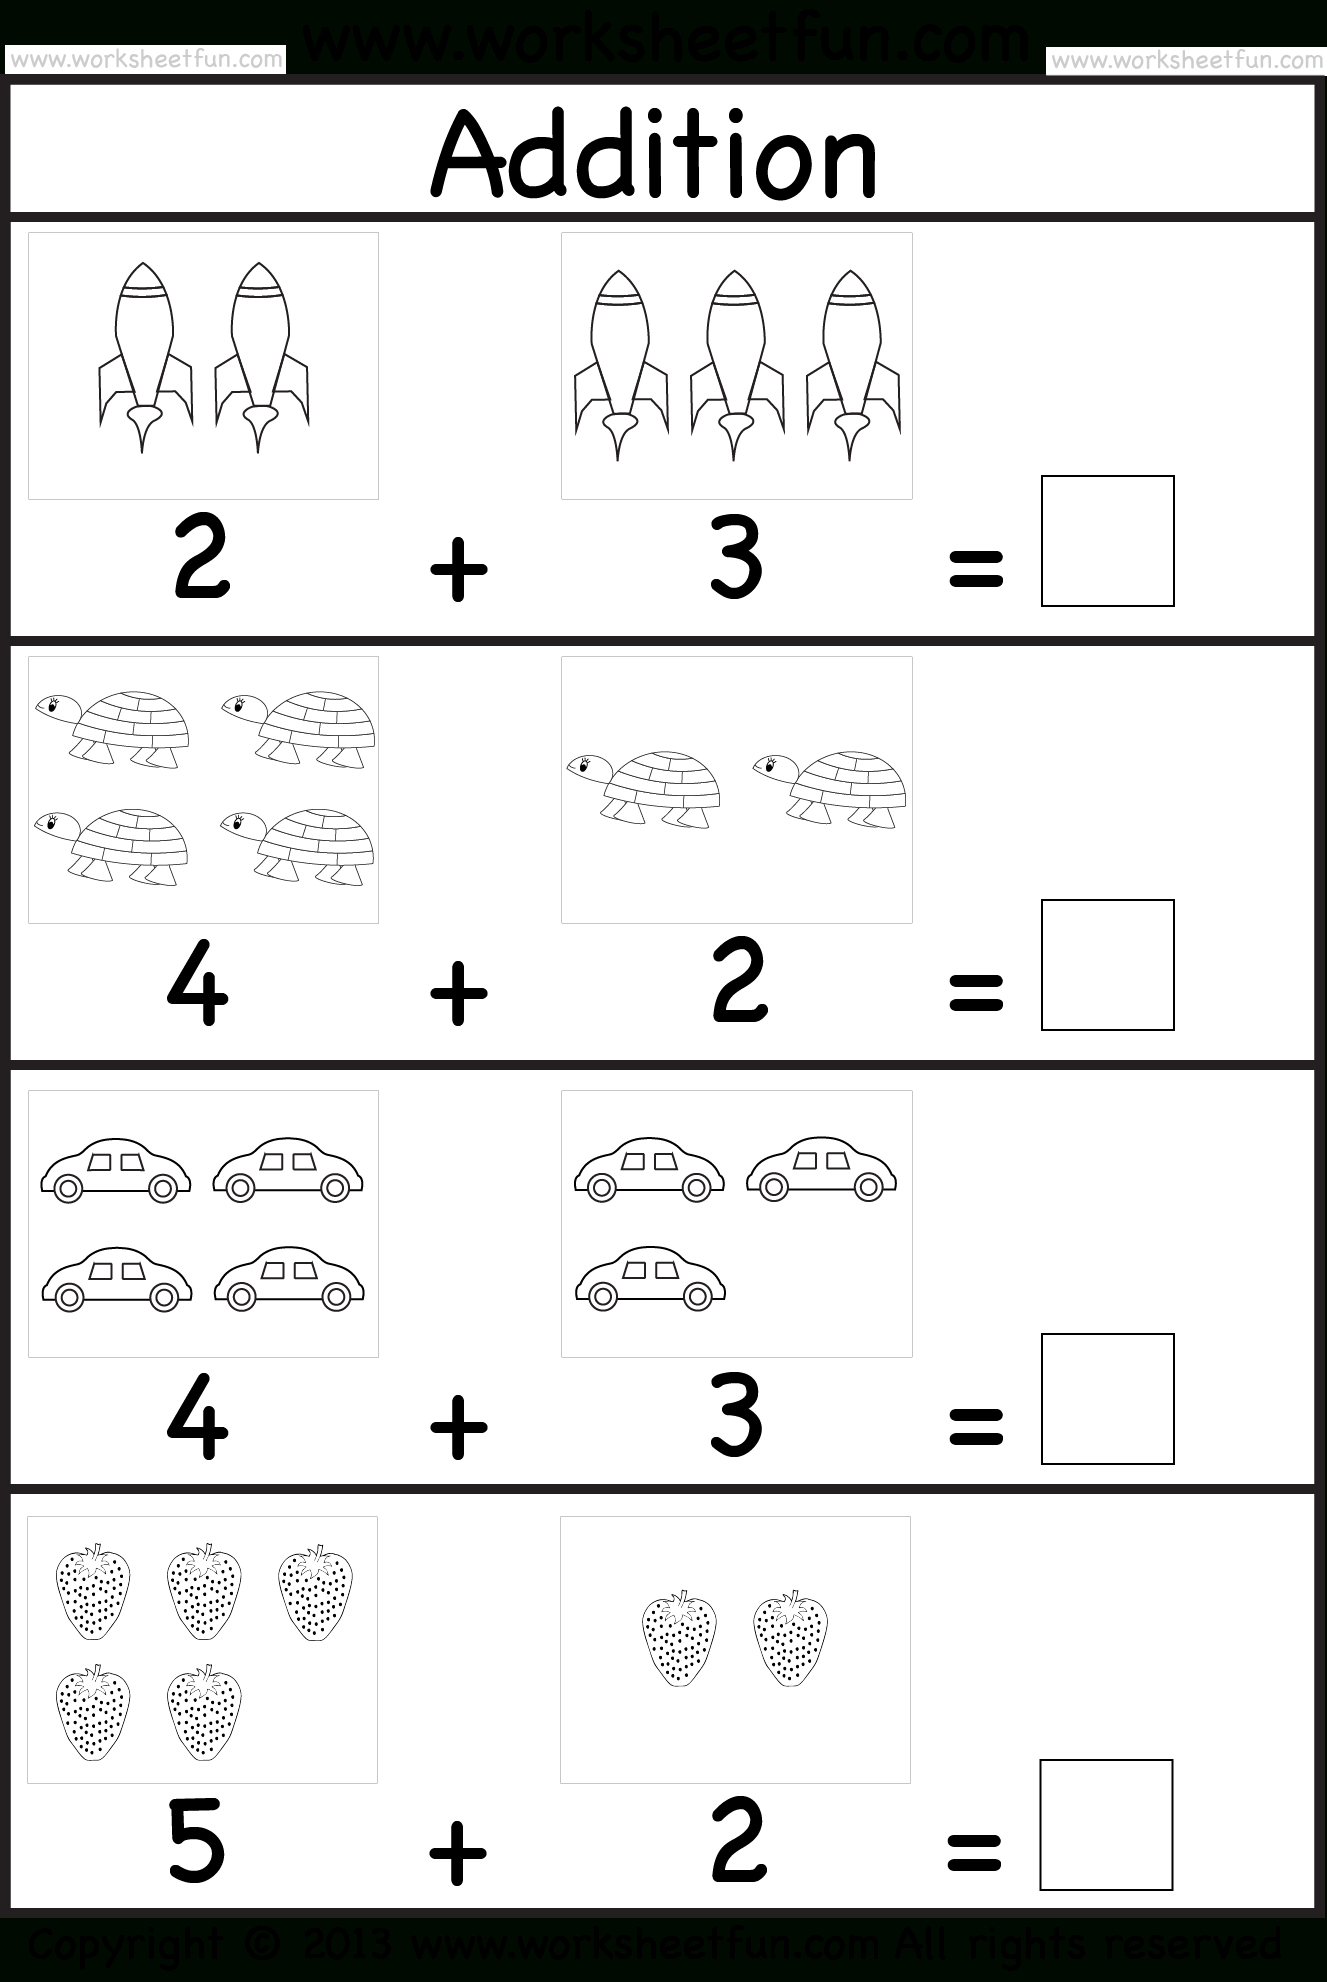 Addition Worksheet. This Site Has Great Free Worksheets For - Free Printable Homework Worksheets